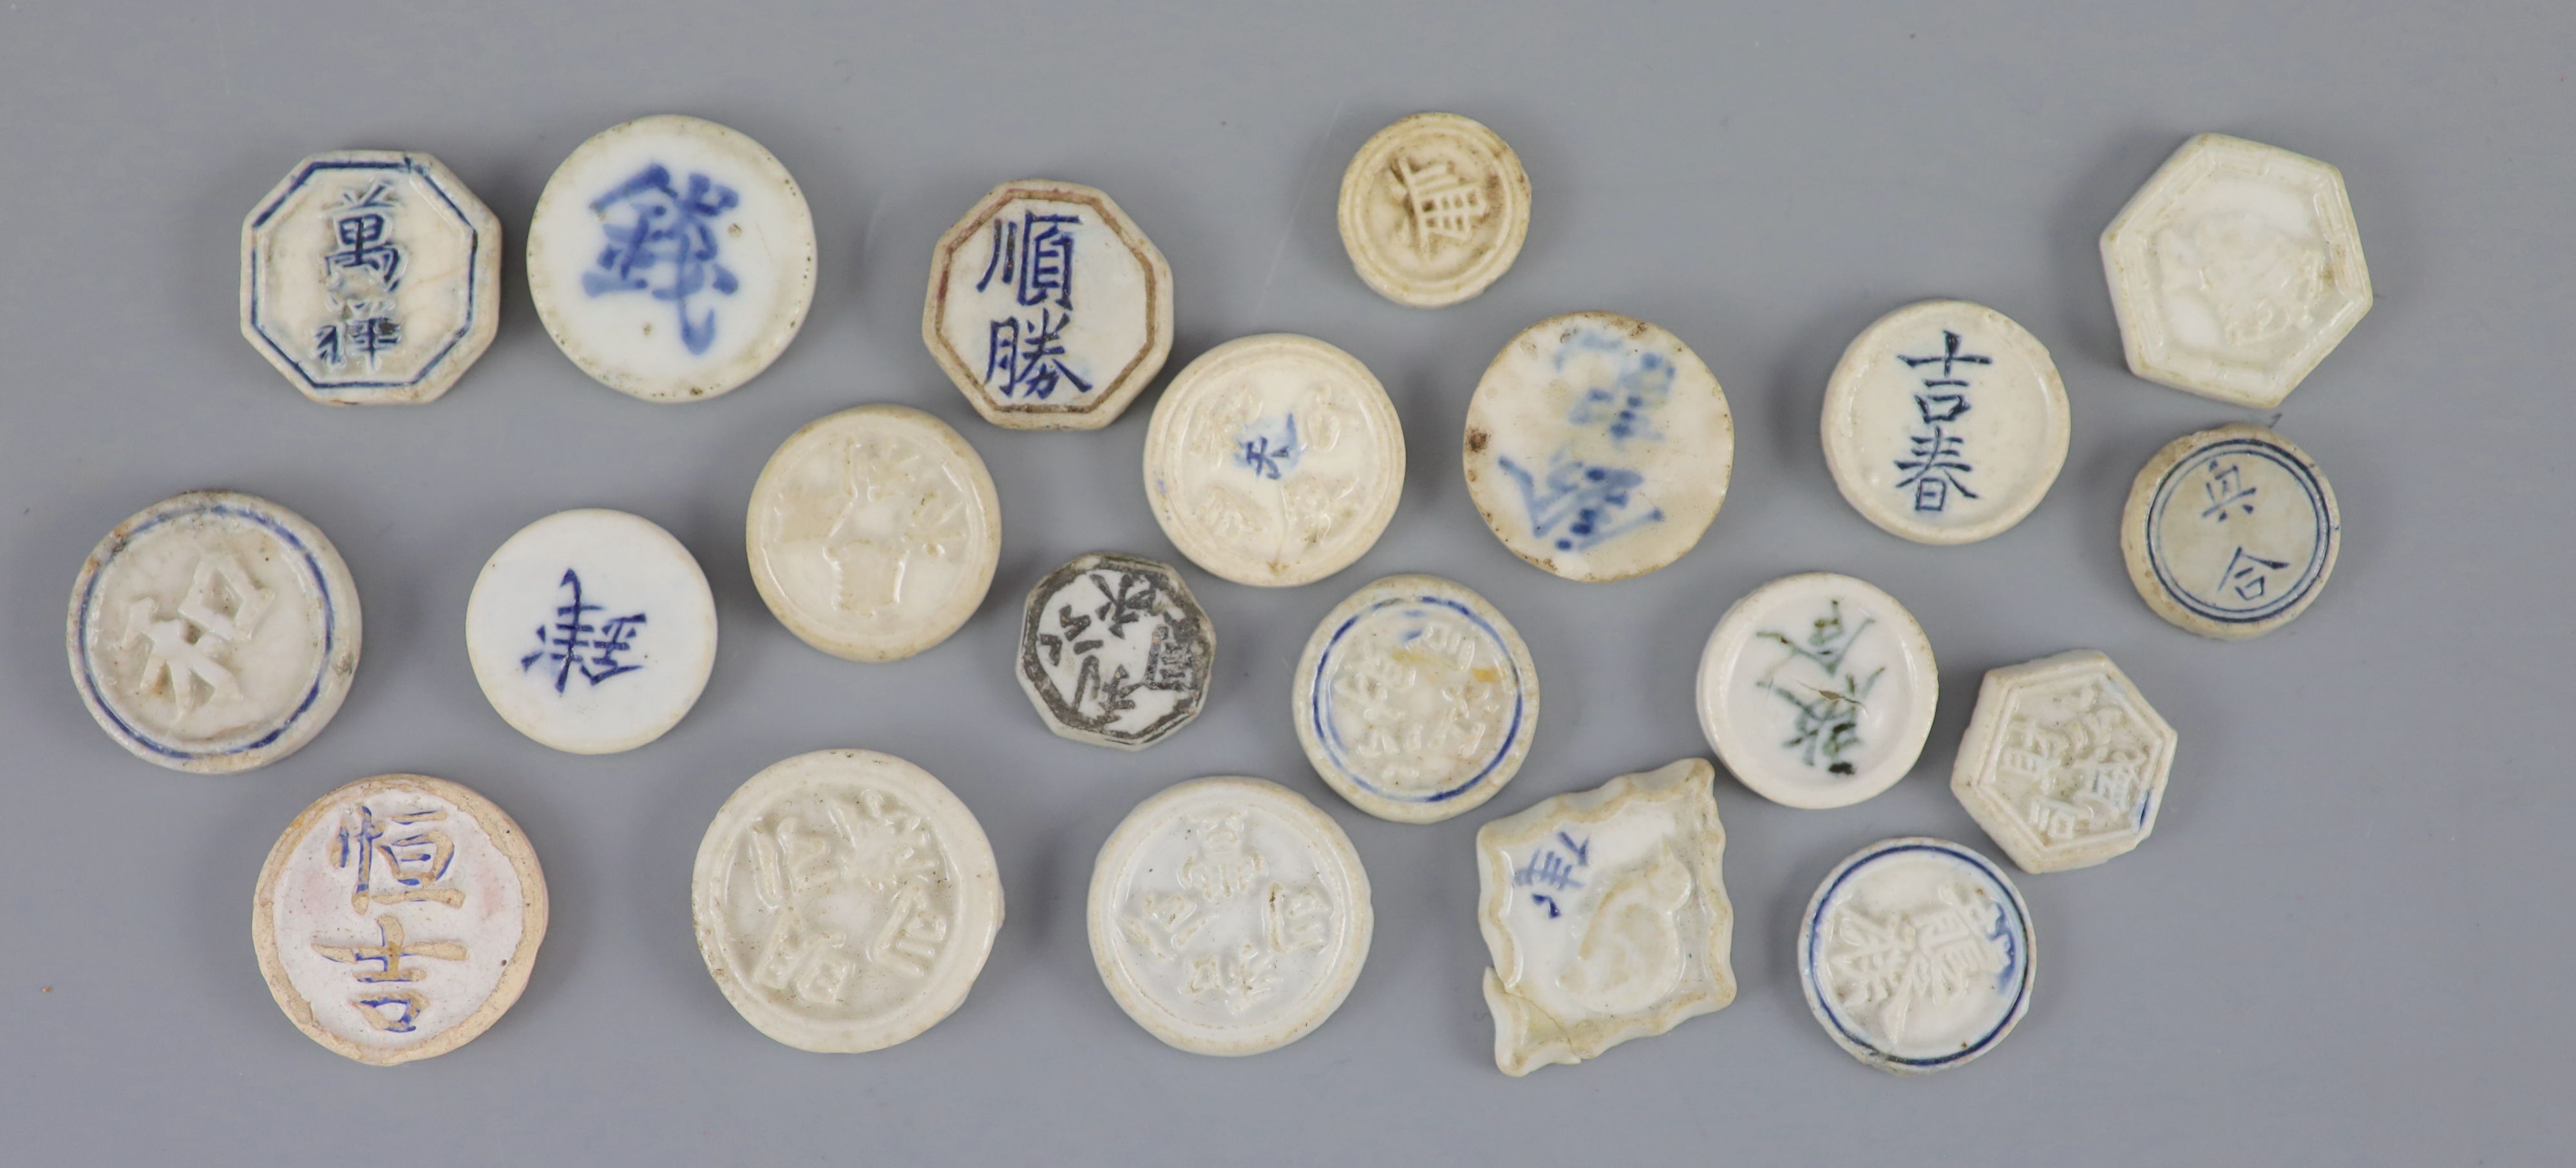 China, a group of 6 bronze coin charms or amulets, 19th century and various Thai (Siamese) porcelain - Bild 7 aus 7